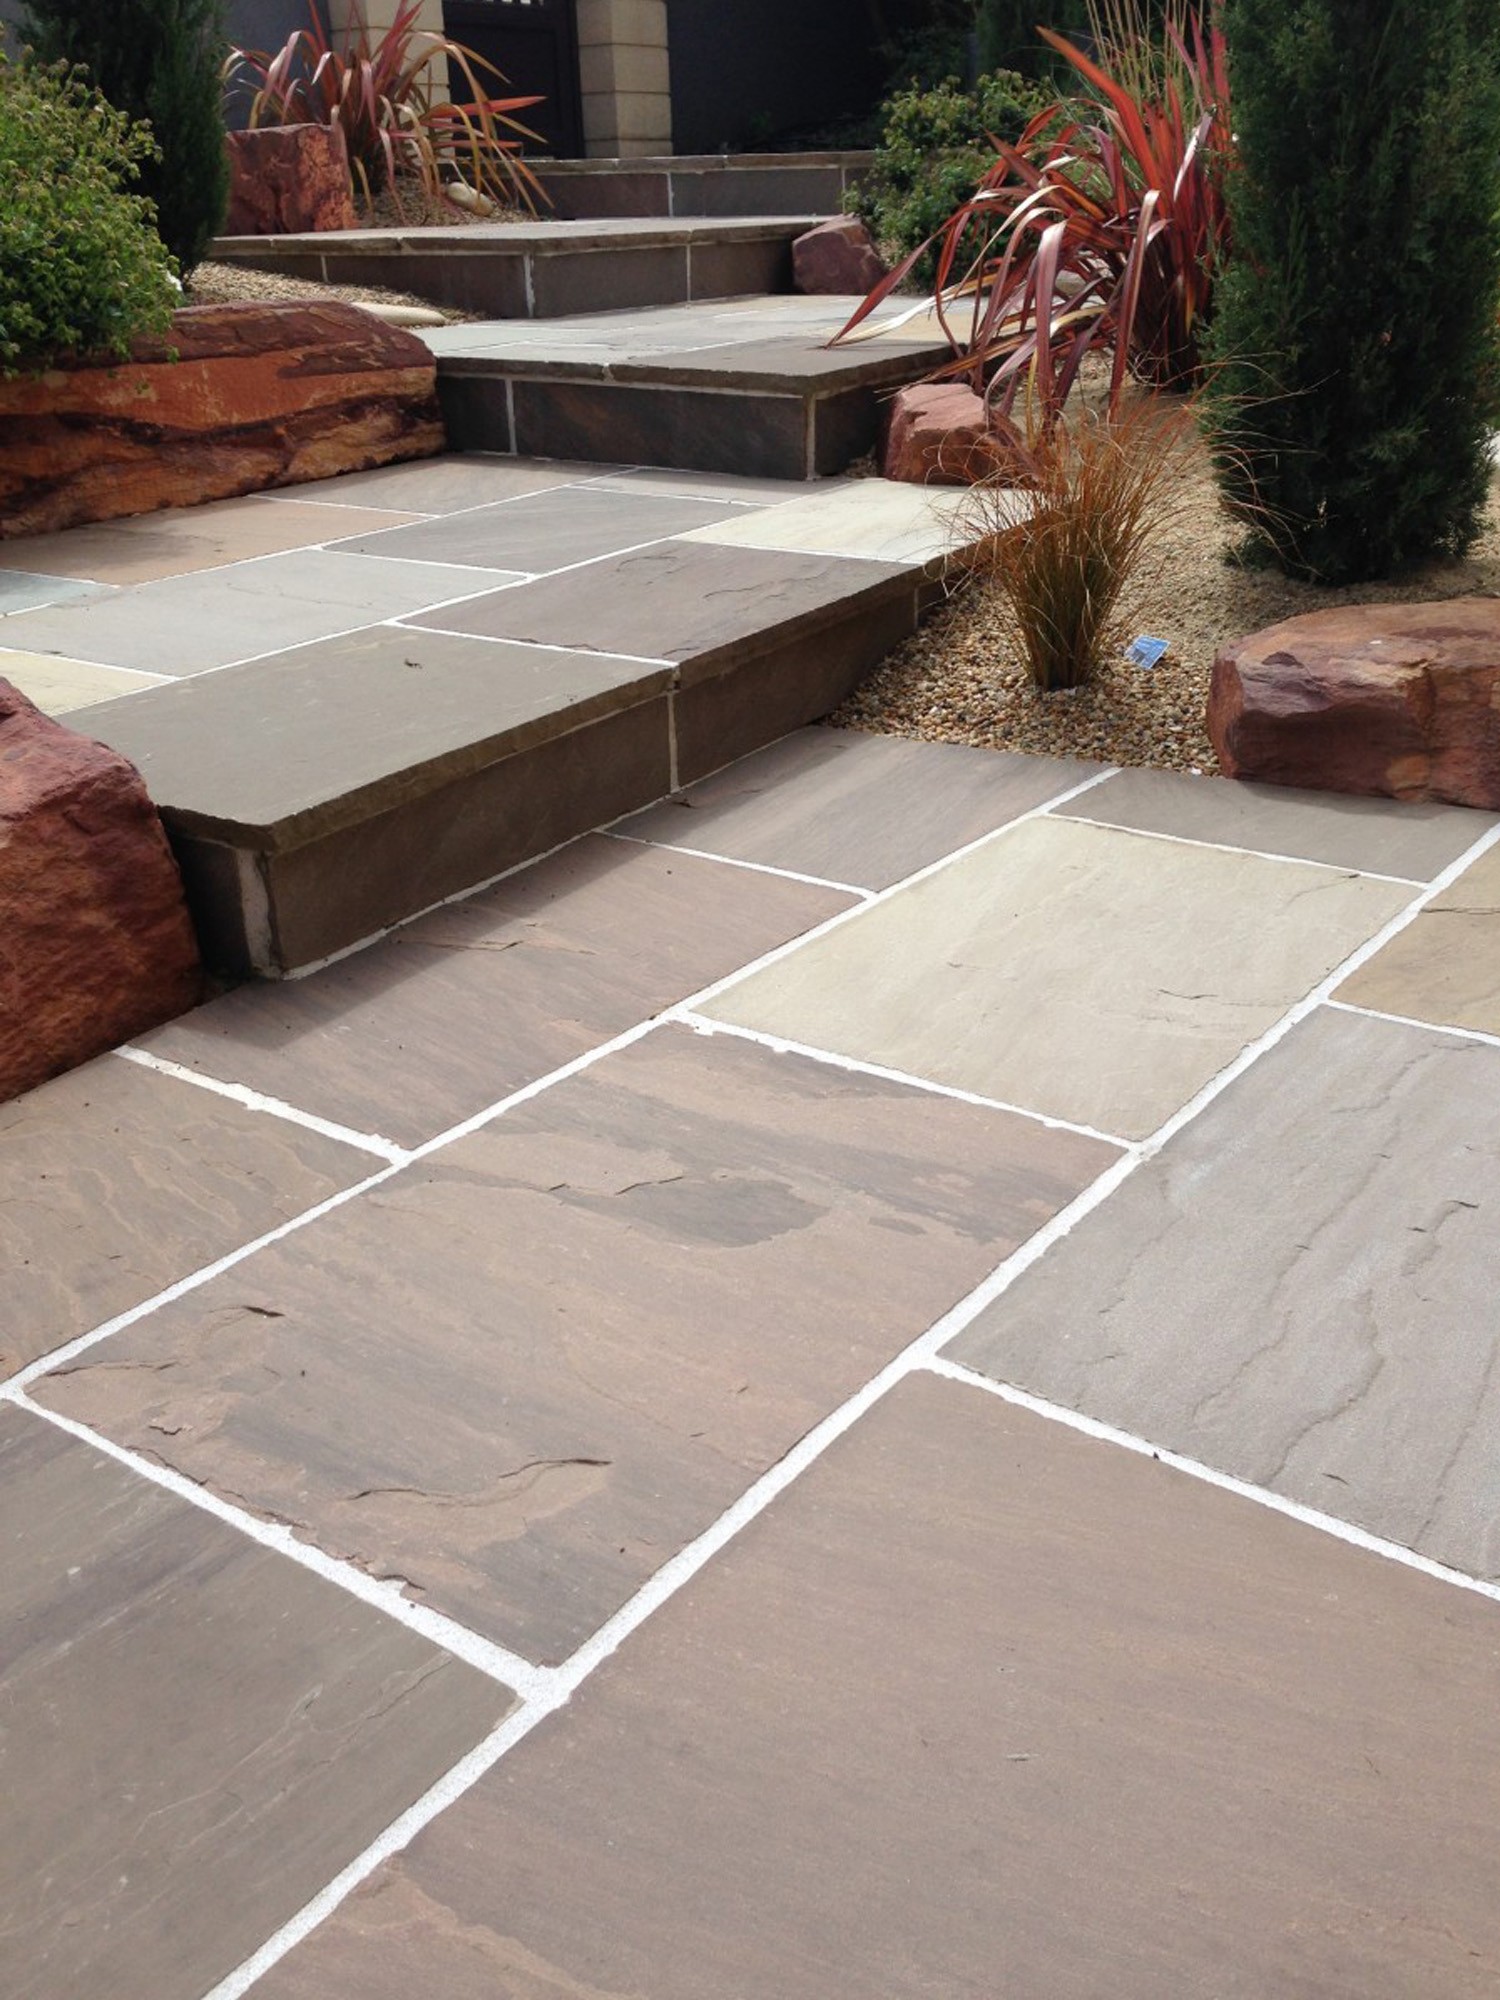 Autumn Brown Indian Sandstone Paving Slabs - 900x600 Pack